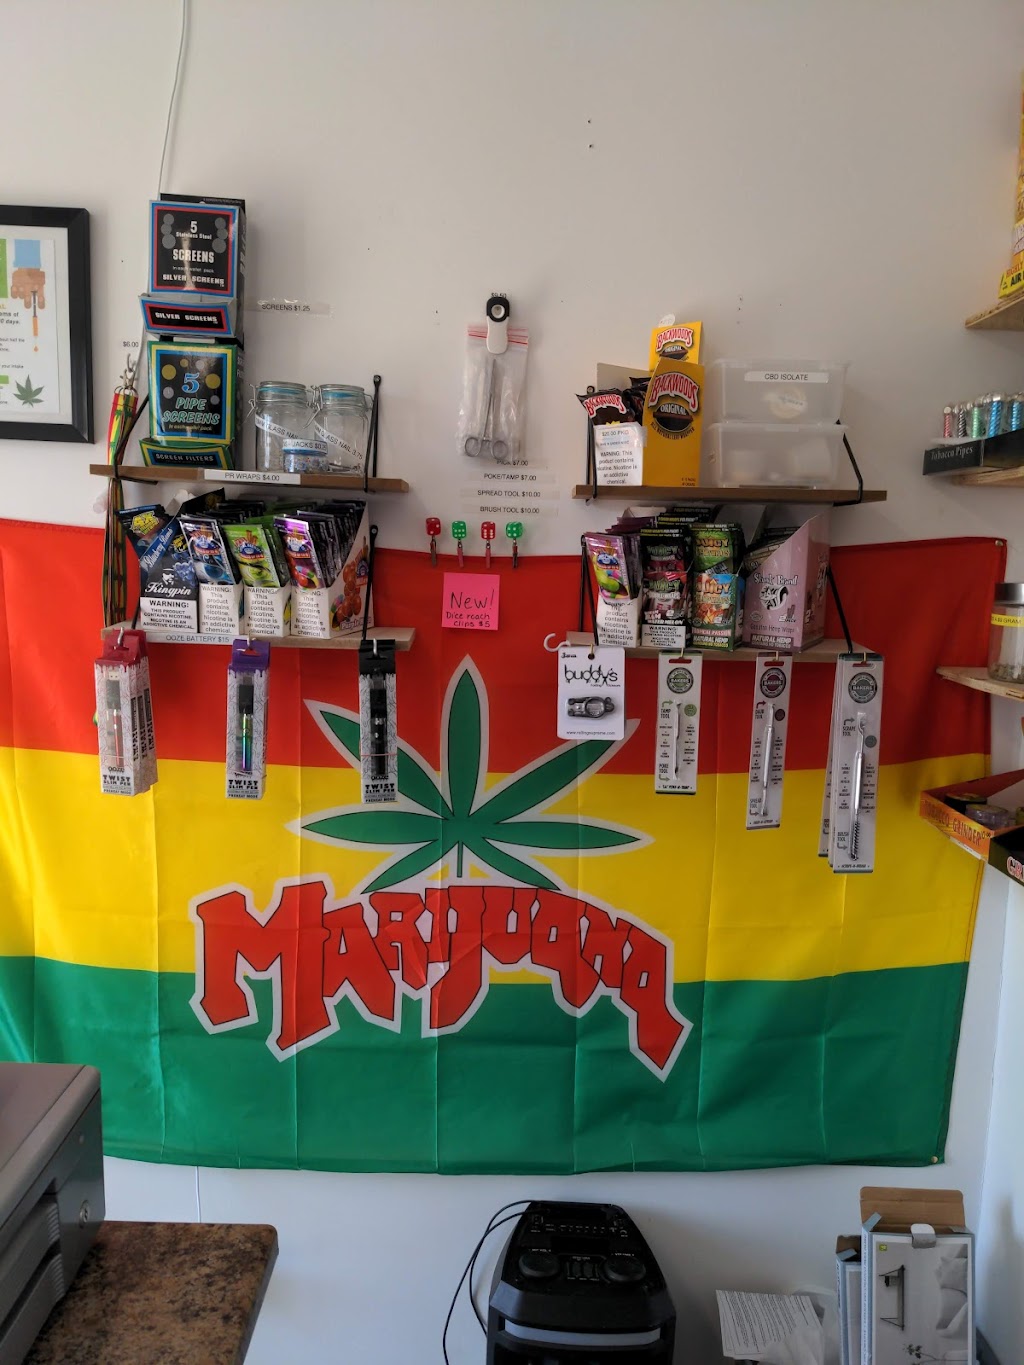 The Shack Medical Cannabis | store | 23 New Ross Reserve Rd, New Ross, NS B0J 2M0, Canada | 9023008599 OR +1 902-300-8599